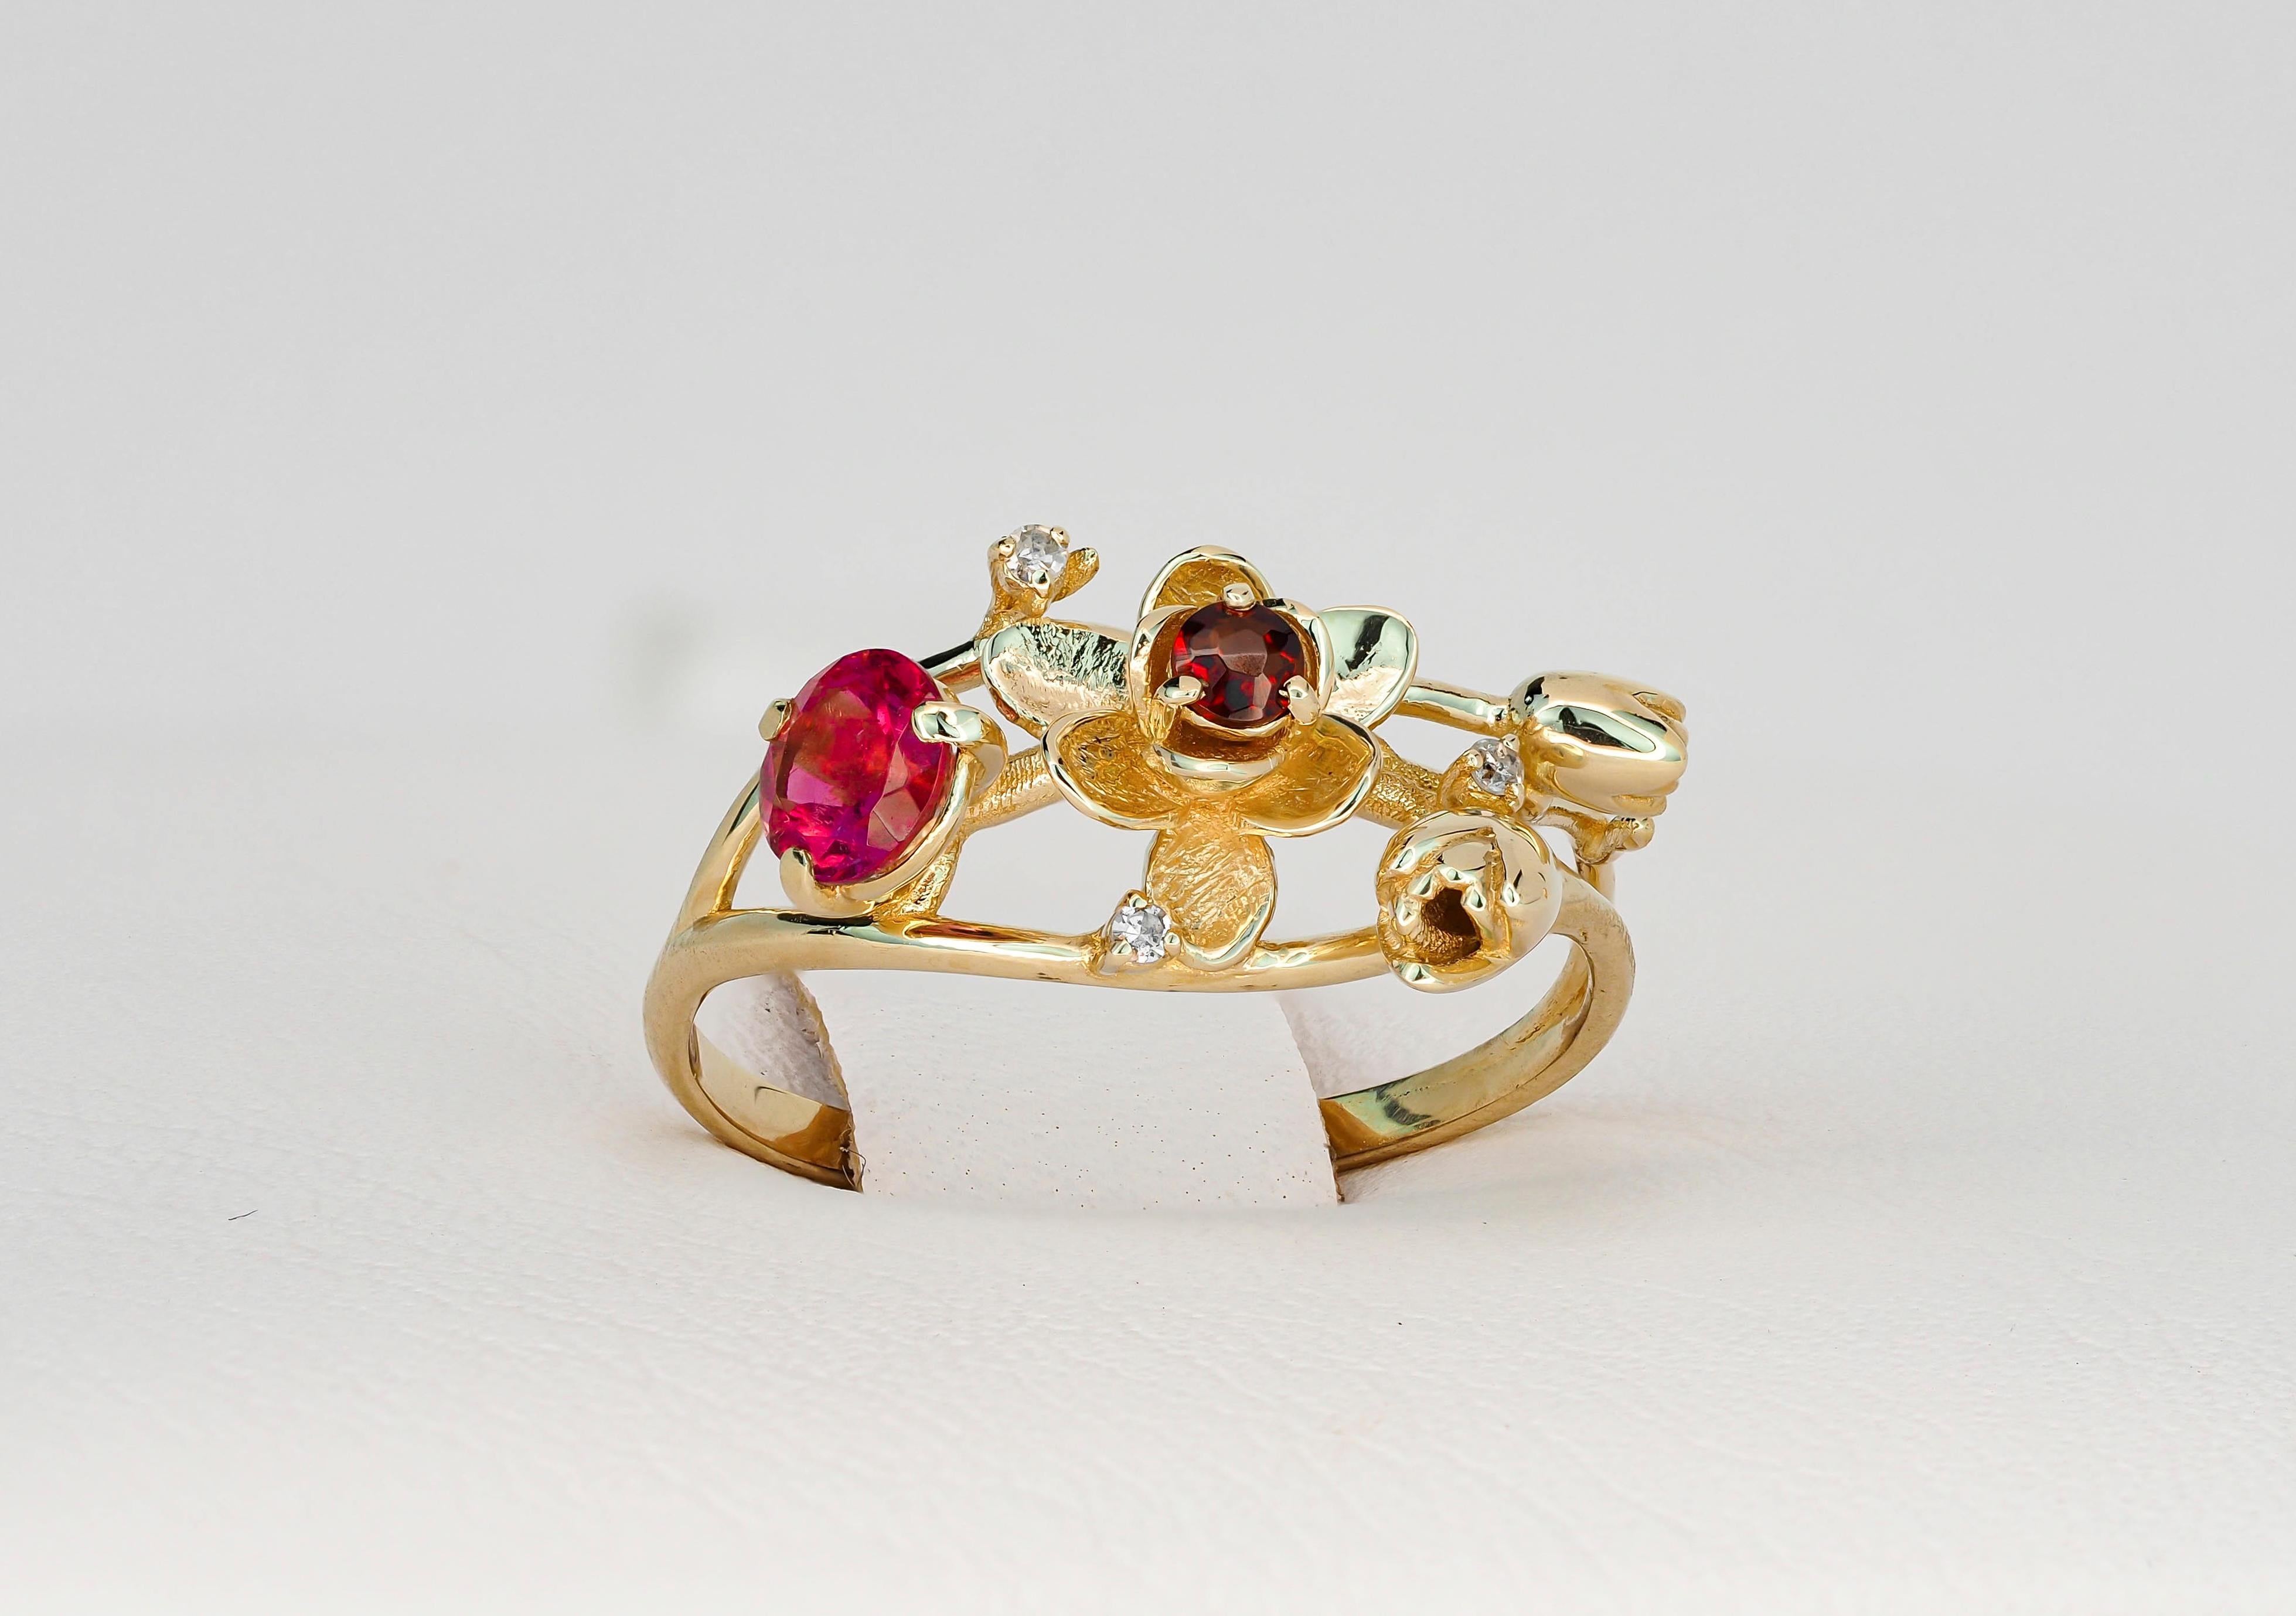 For Sale:  Ruby ring. 14k Gold Ring with Ruby, Garnet and Diamonds. Orchid Flower Ring. 7